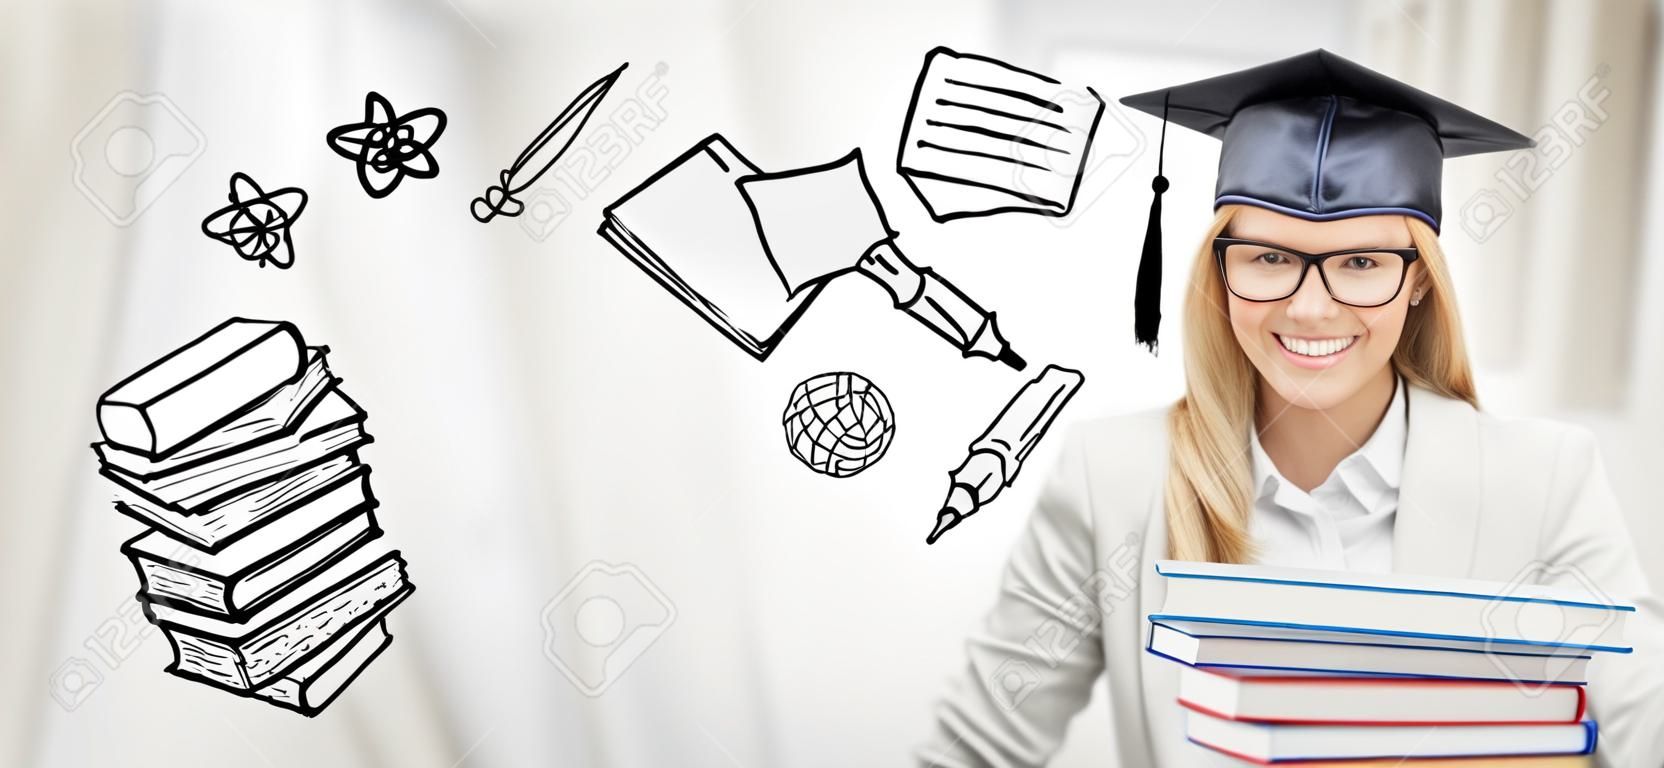 education, school, graduation and people concept - happy student girl or woman in graduation cap with stack of books over doodles